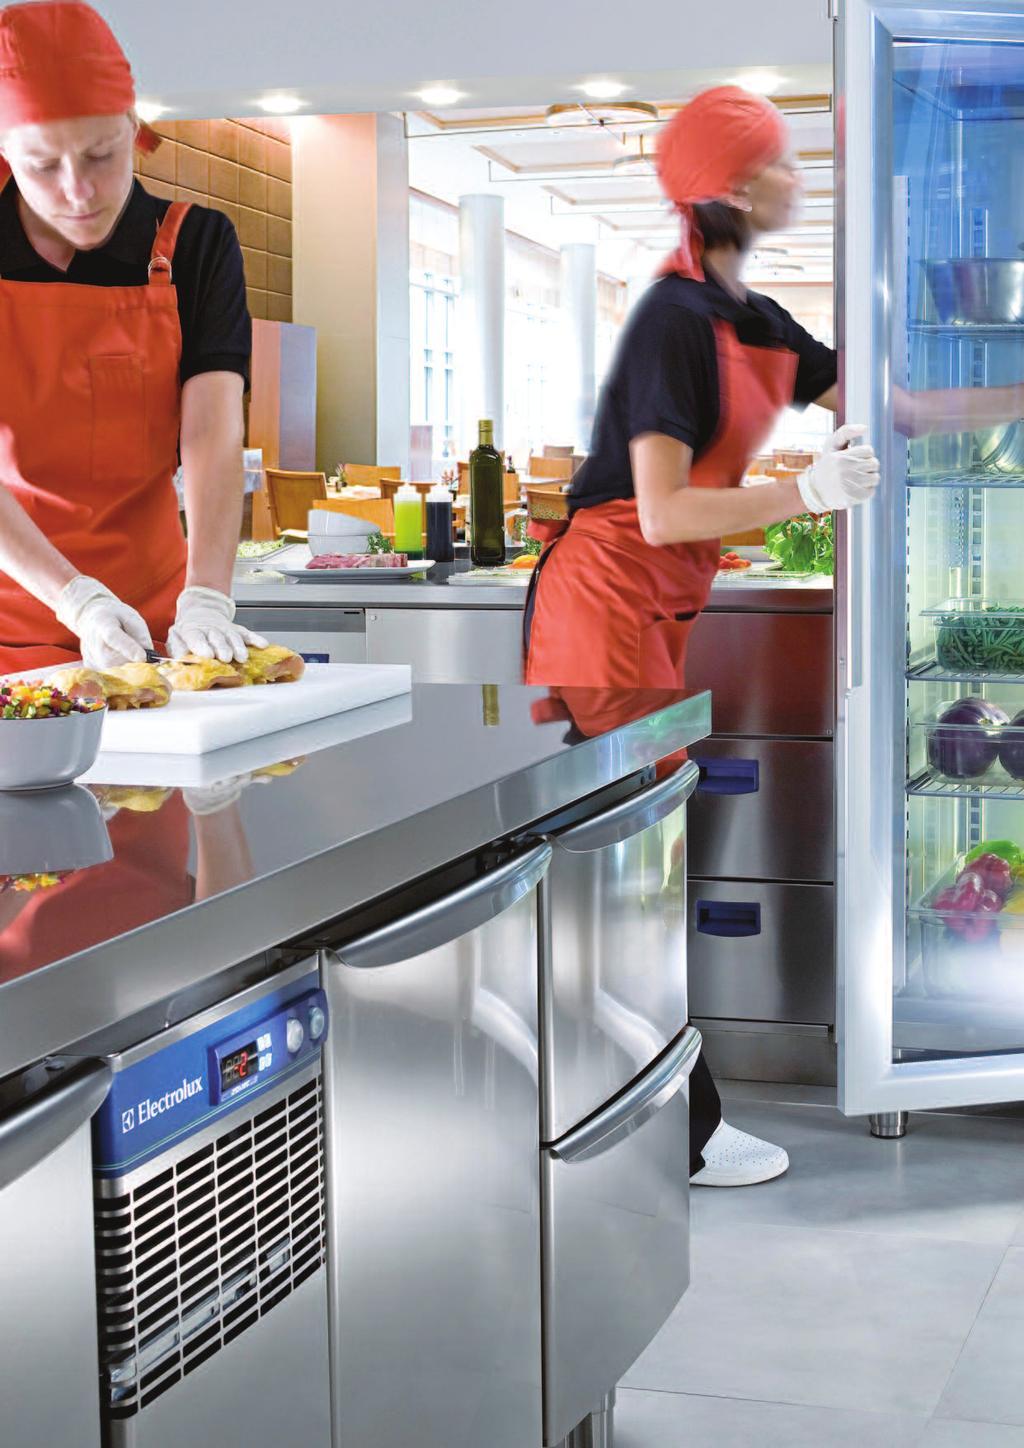 Refrigeration A refrigerator operates 24/7, 365 days of the year. This is why every model across the Electrolux range is designed to maximise the storage capacity whilst minimising energy consumption.